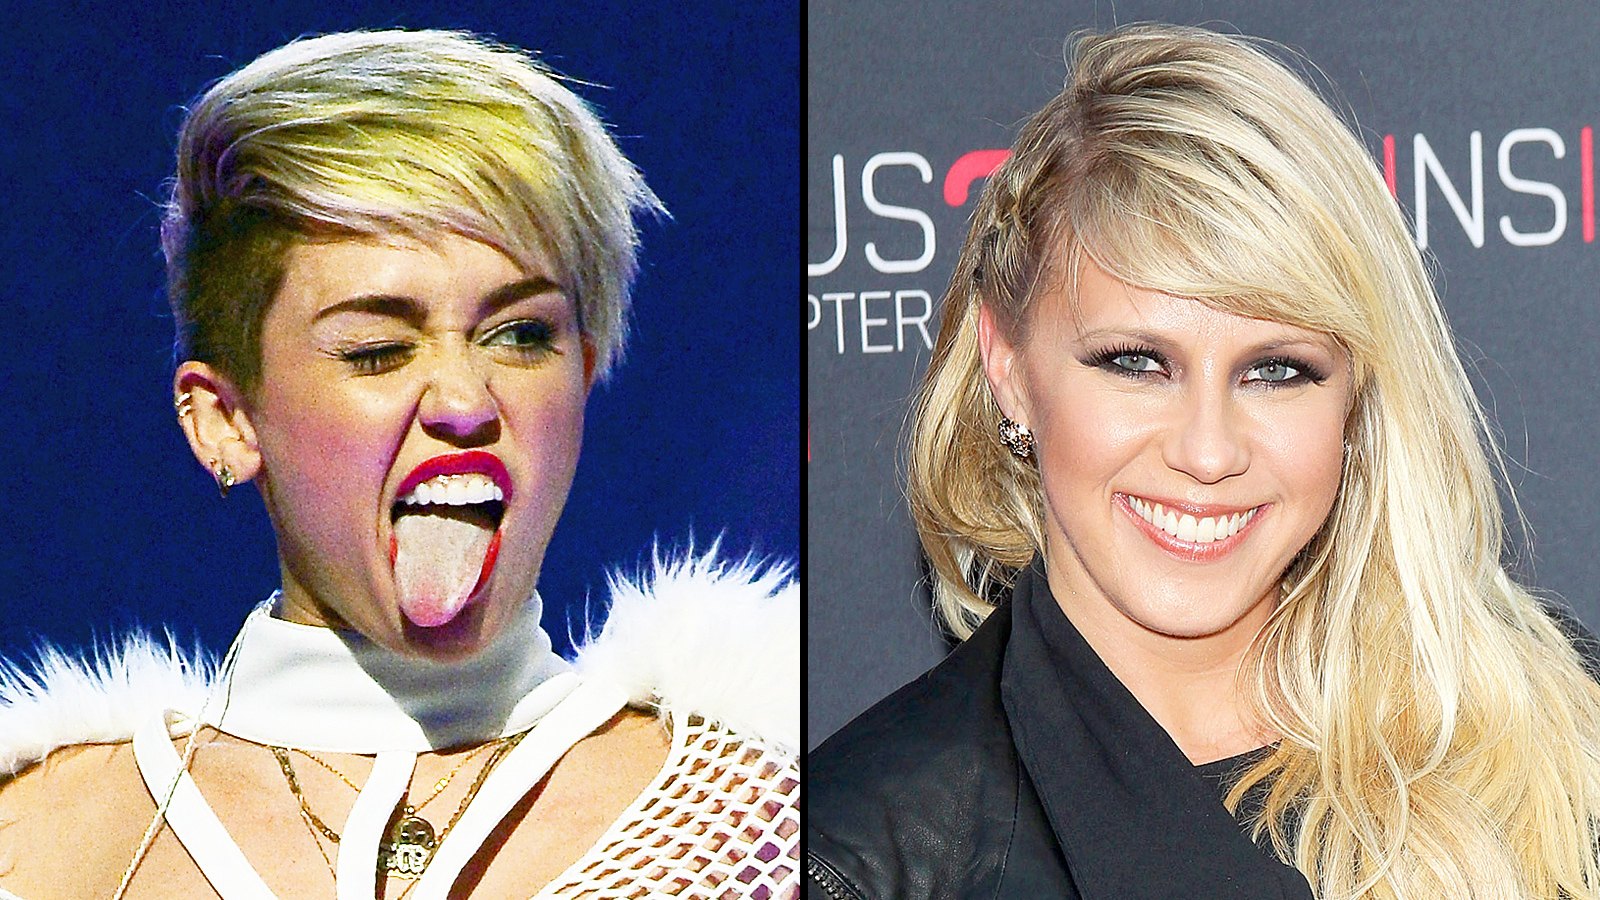 Miley Cyrus and Jodie Sweetin